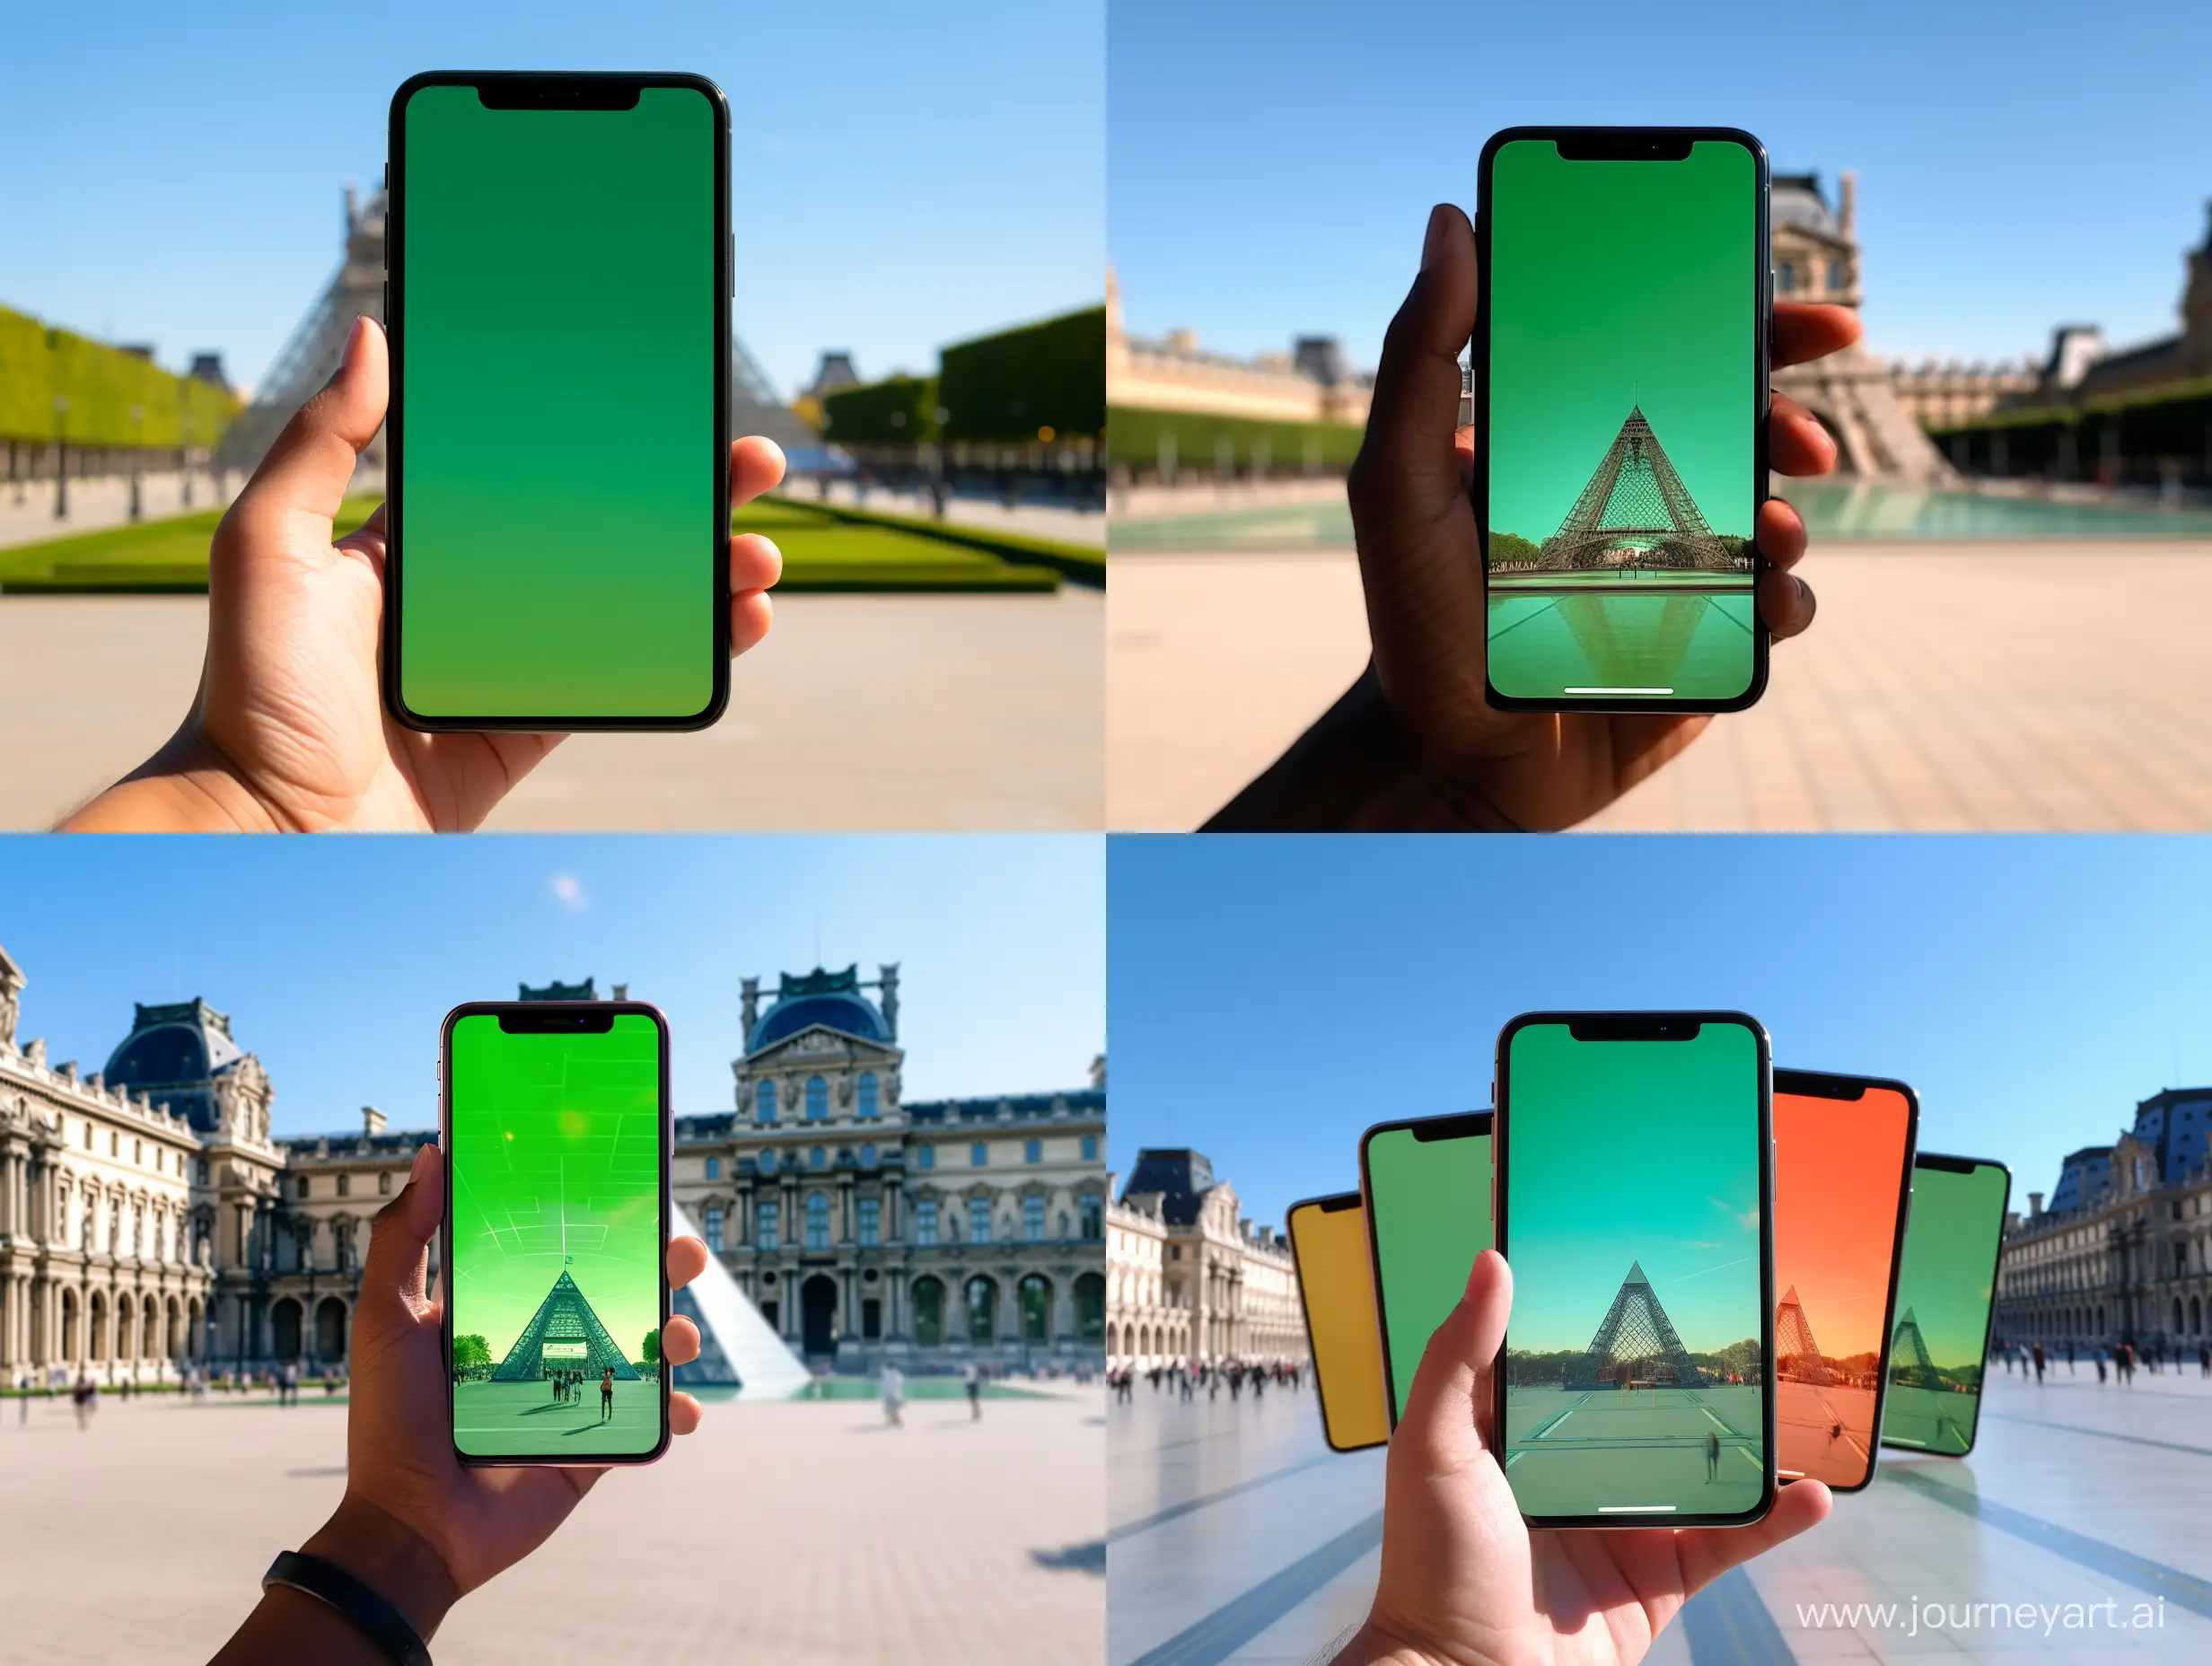 a hand holding an iPhone 15 with a green screen, with the entrance of the Louvre museum in the background, daylight. sunny. ratio 16:9